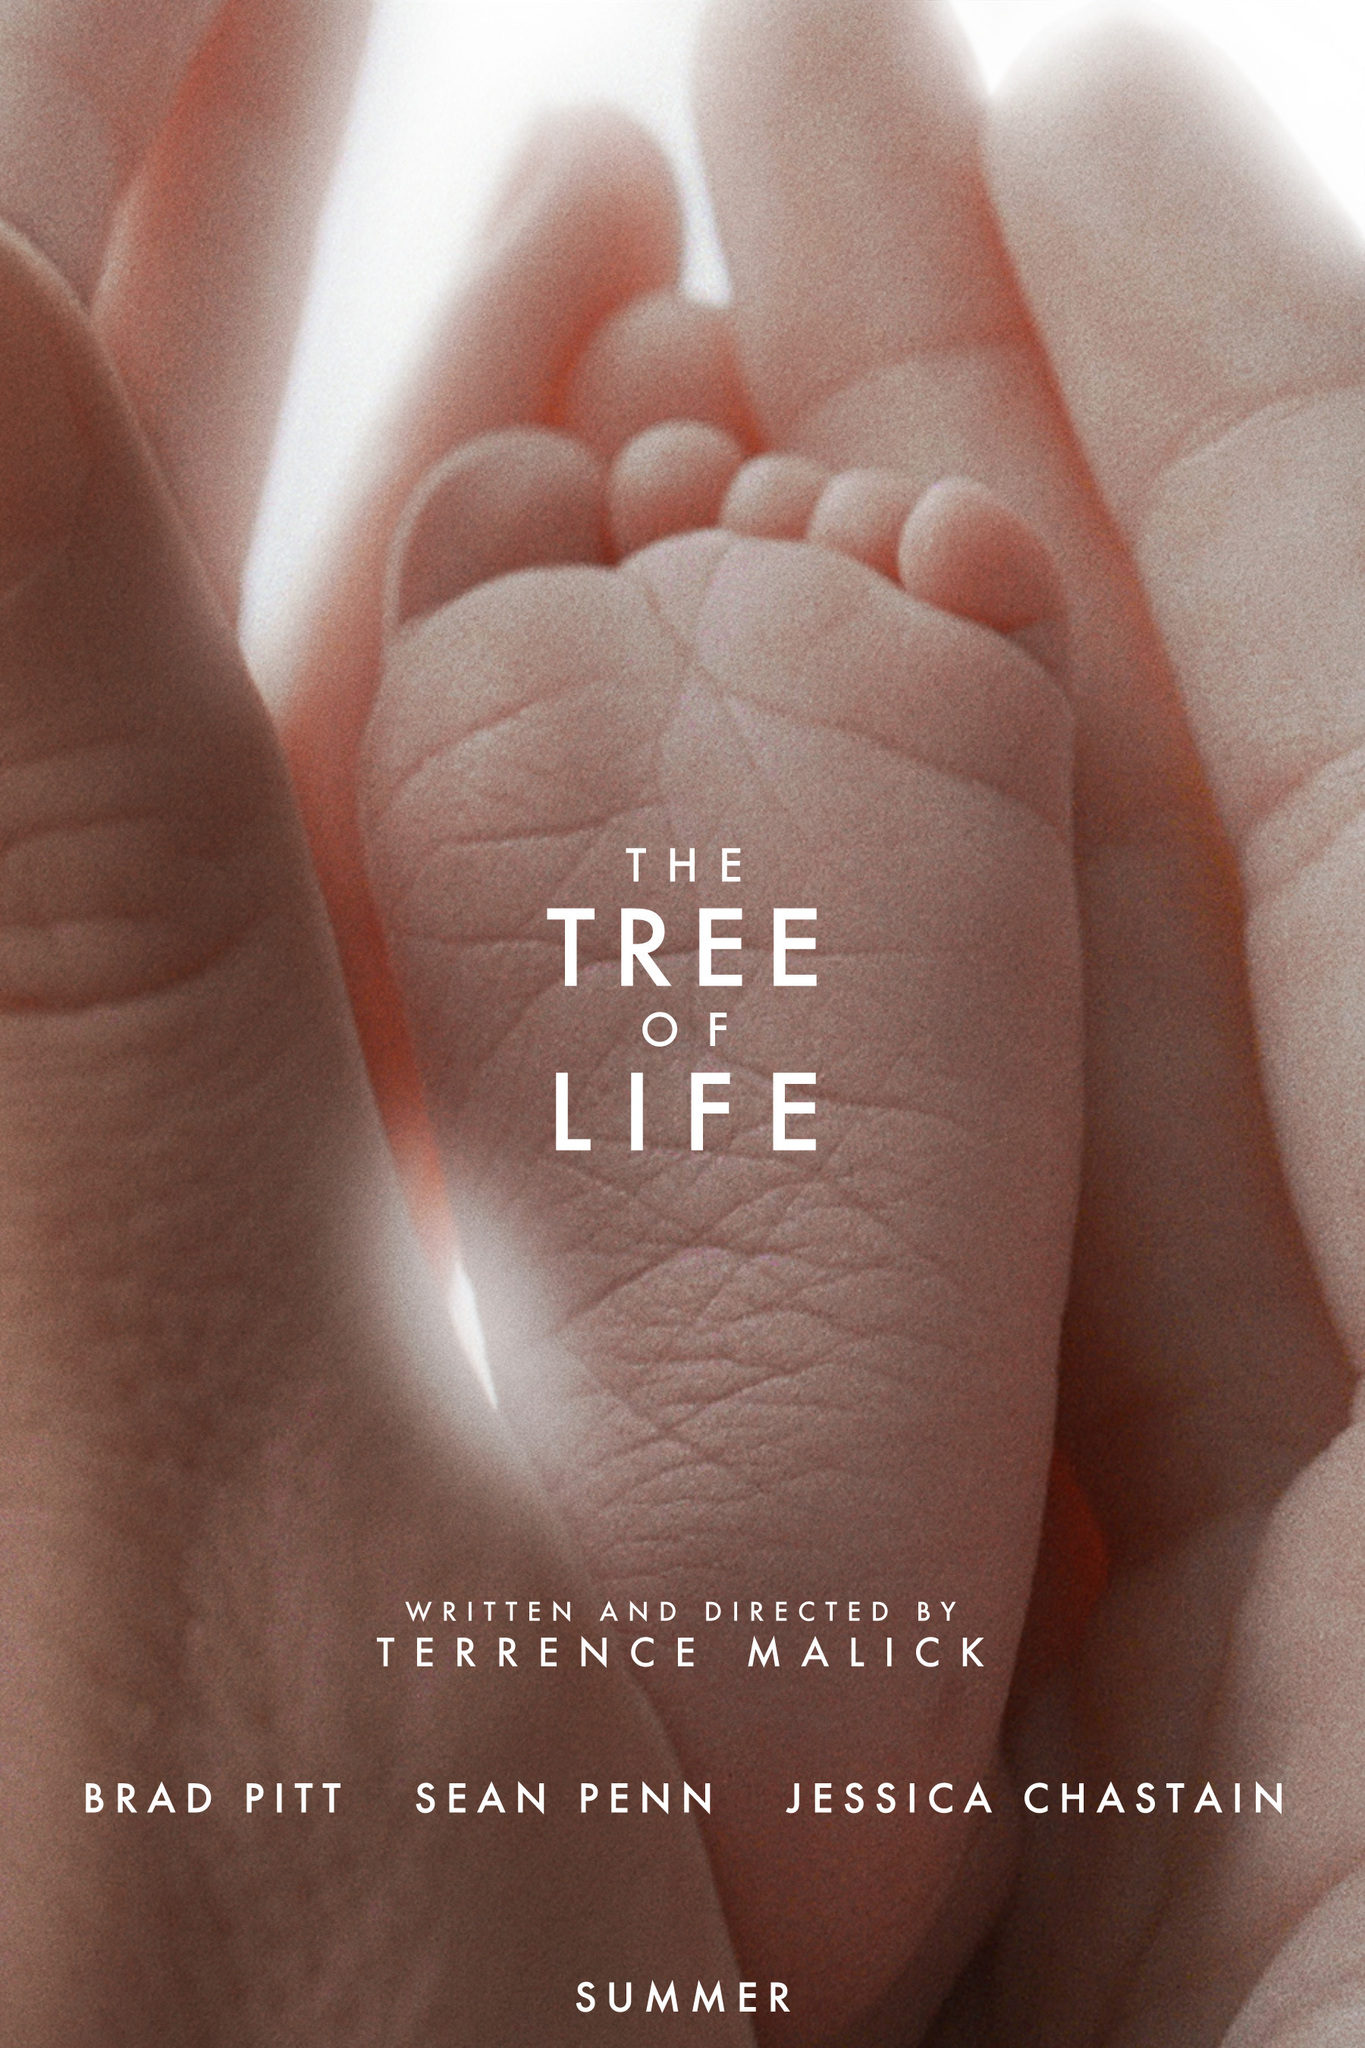 Would you demand a refund for watching Brad Pitt's Tree Of Life?